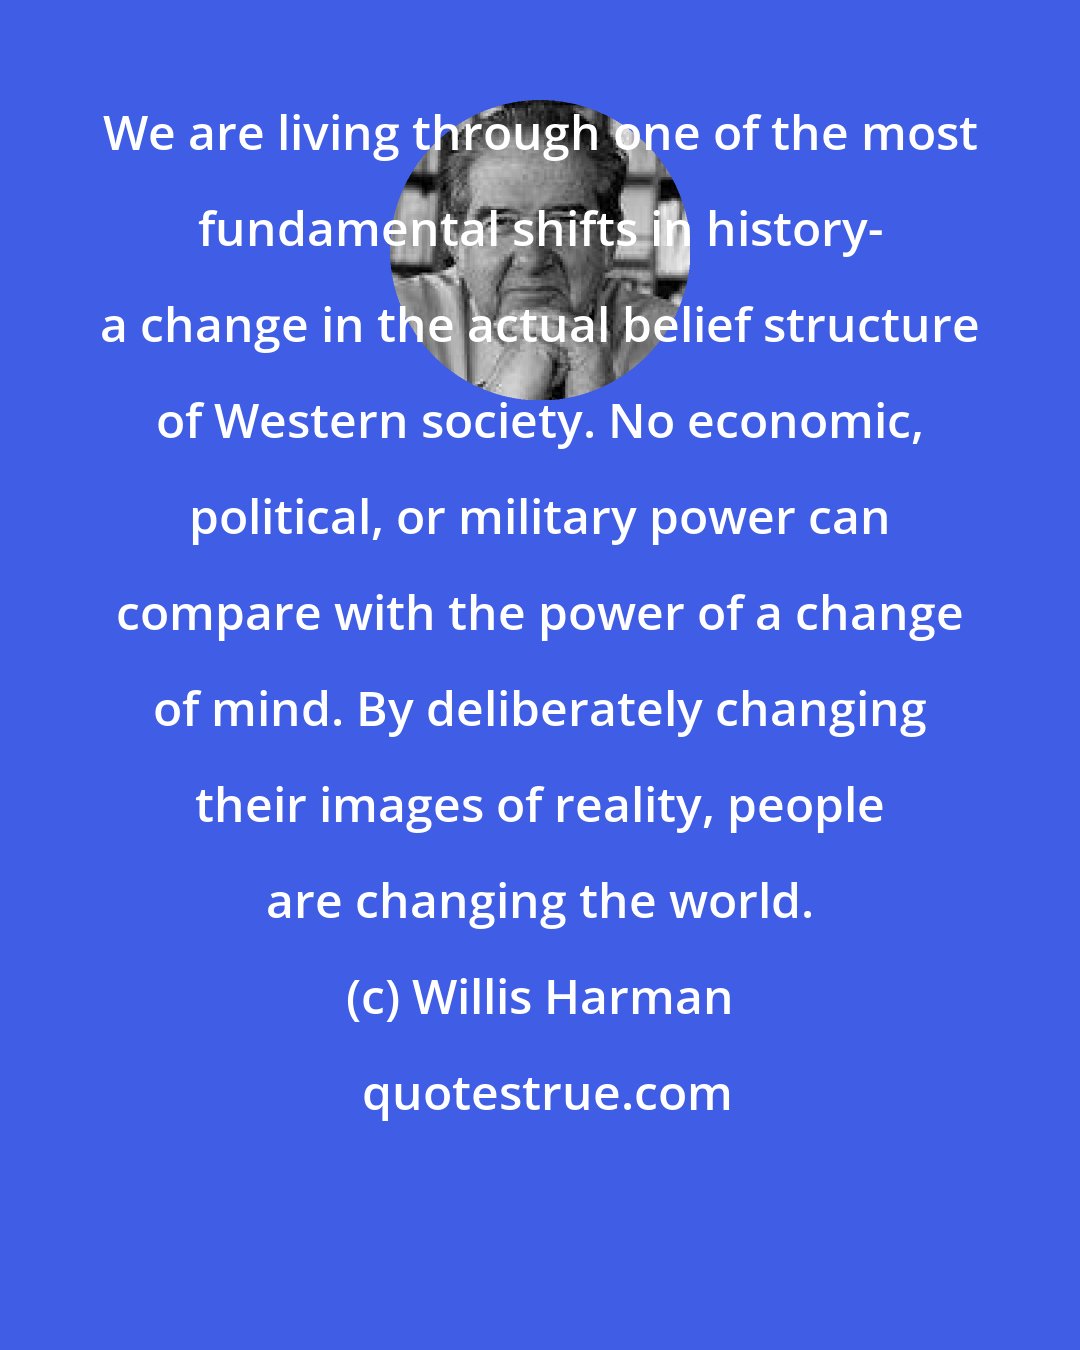 Willis Harman: We are living through one of the most fundamental shifts in history- a change in the actual belief structure of Western society. No economic, political, or military power can compare with the power of a change of mind. By deliberately changing their images of reality, people are changing the world.